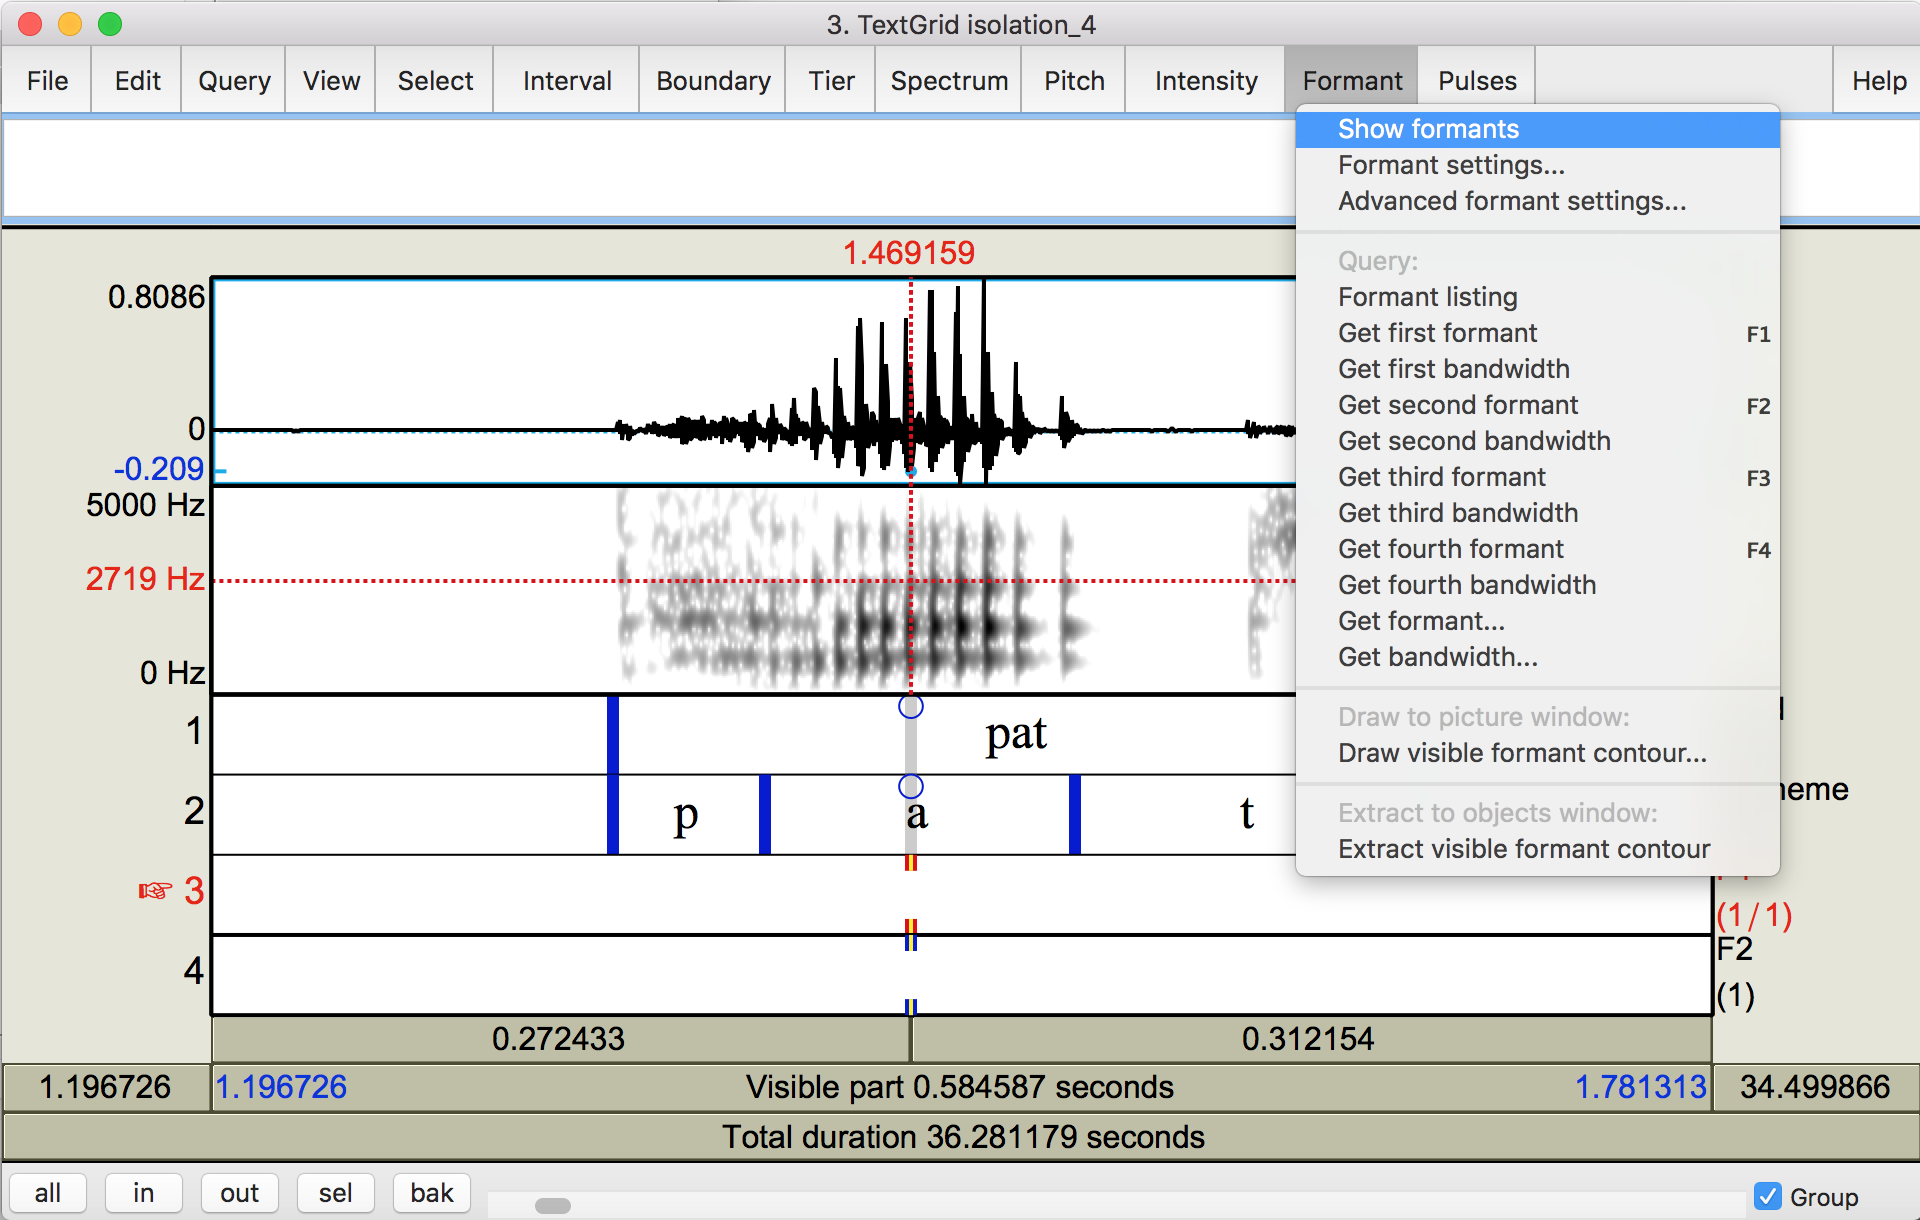 praat draw visible spectrogram and textgrid script